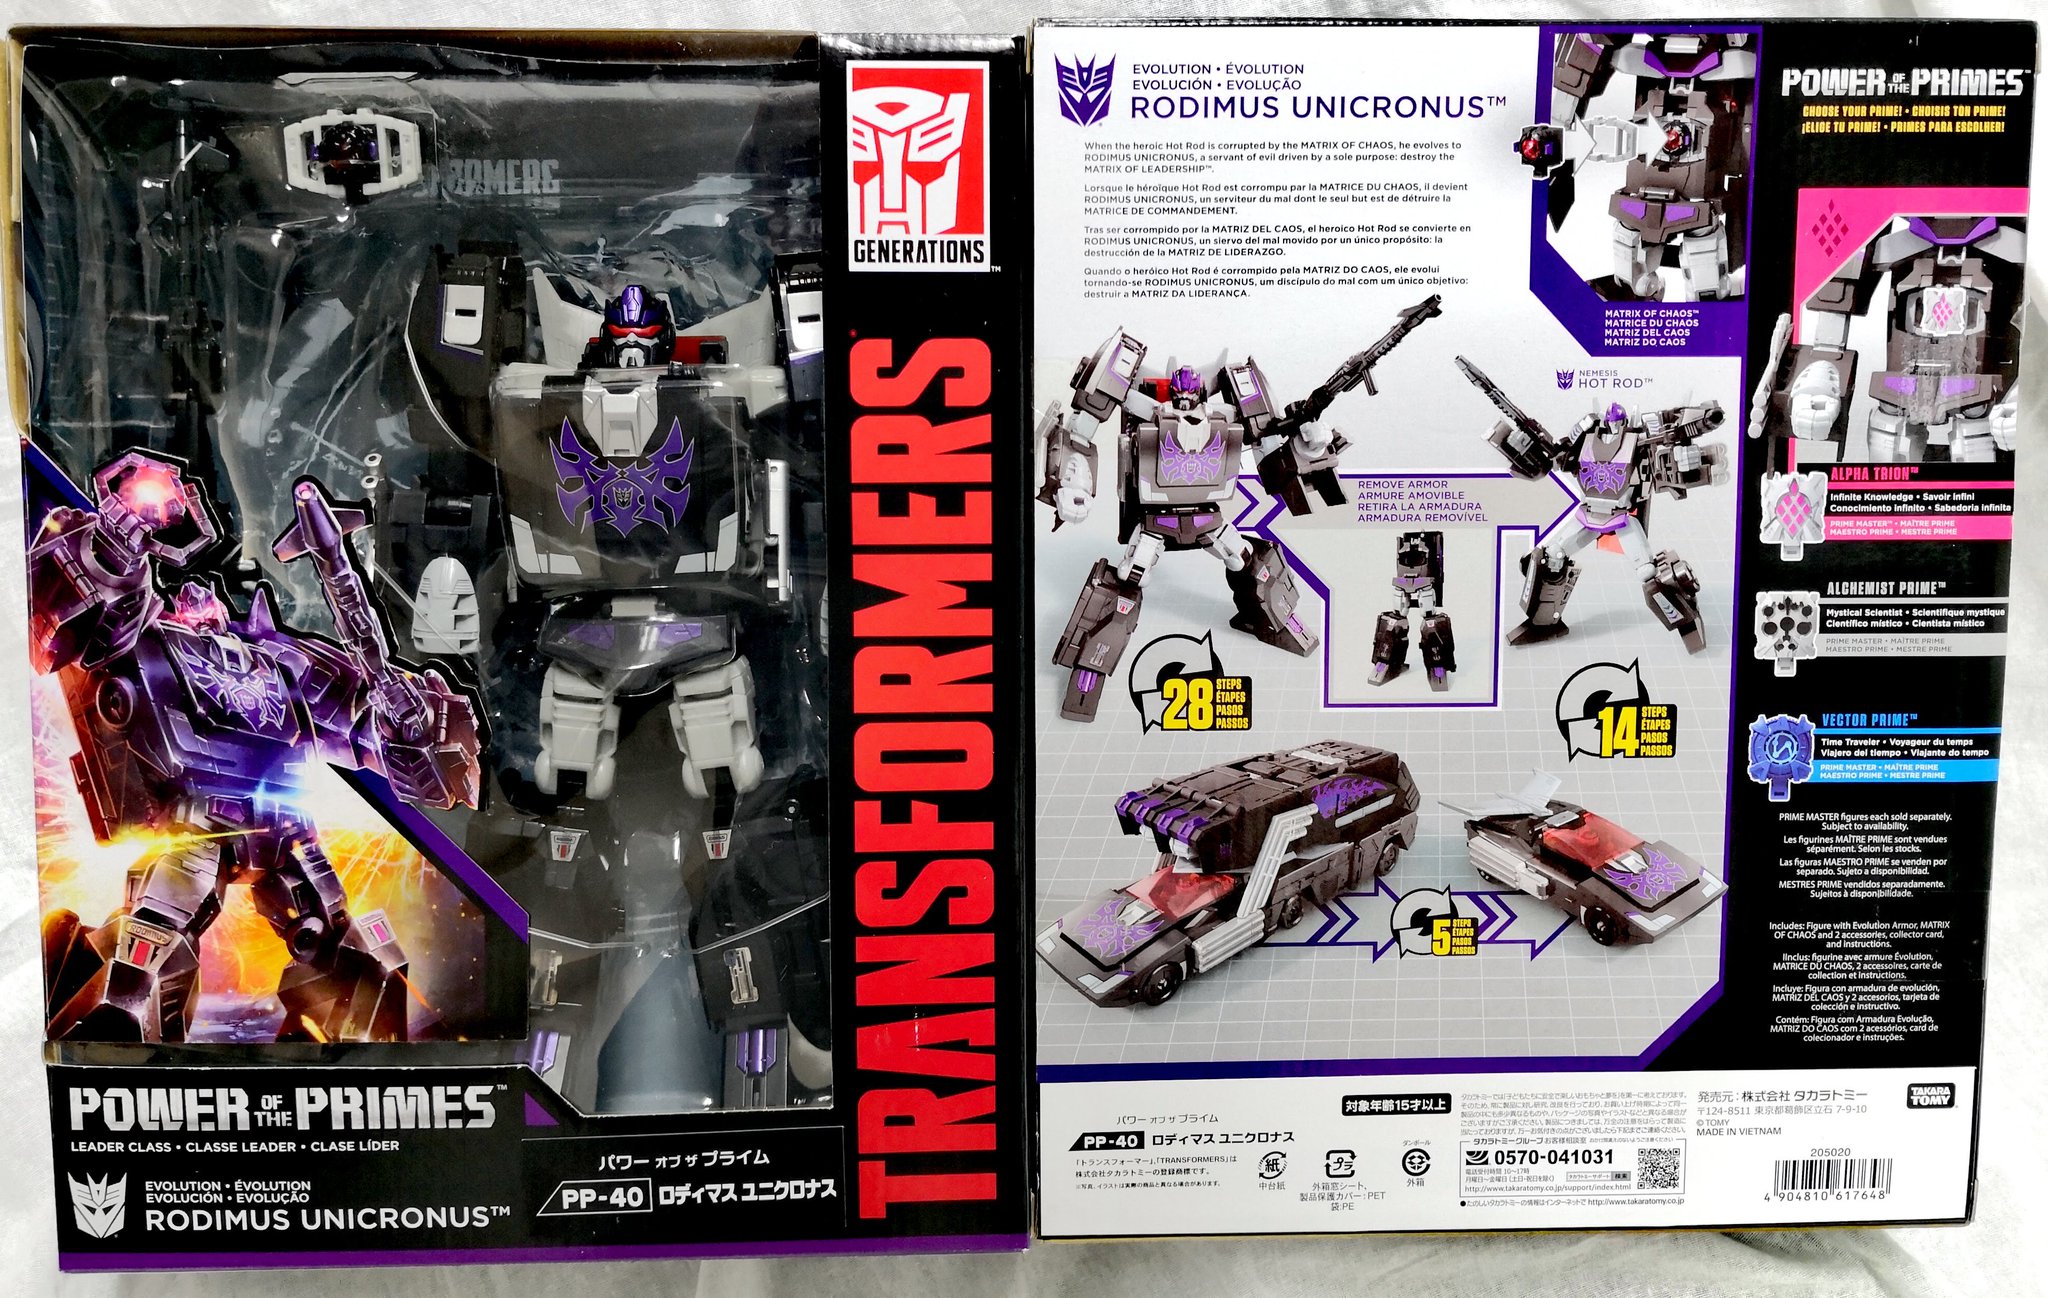 The Japanese Games Hobby Import Specialist Transformers Power Of The Prime Pp 37 Megatronus Takara Tomy In Stock T Co Fqpjs5cx6c Transformers Power Of The Prime Pp 40 Rodimus